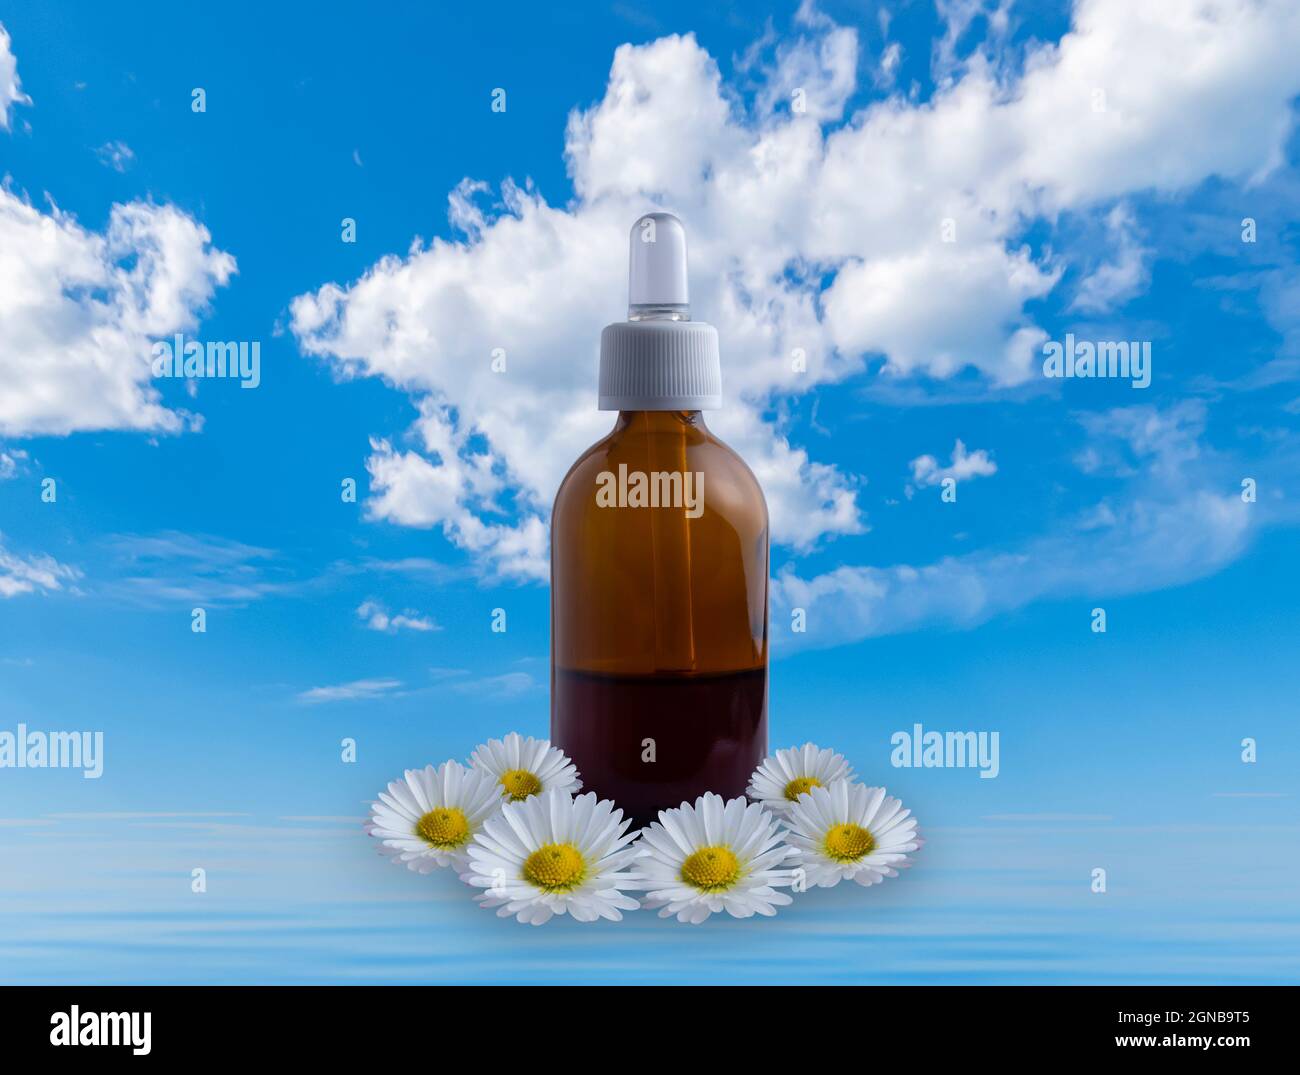 Dropper bottle with white daisies and light blue background Stock Photo